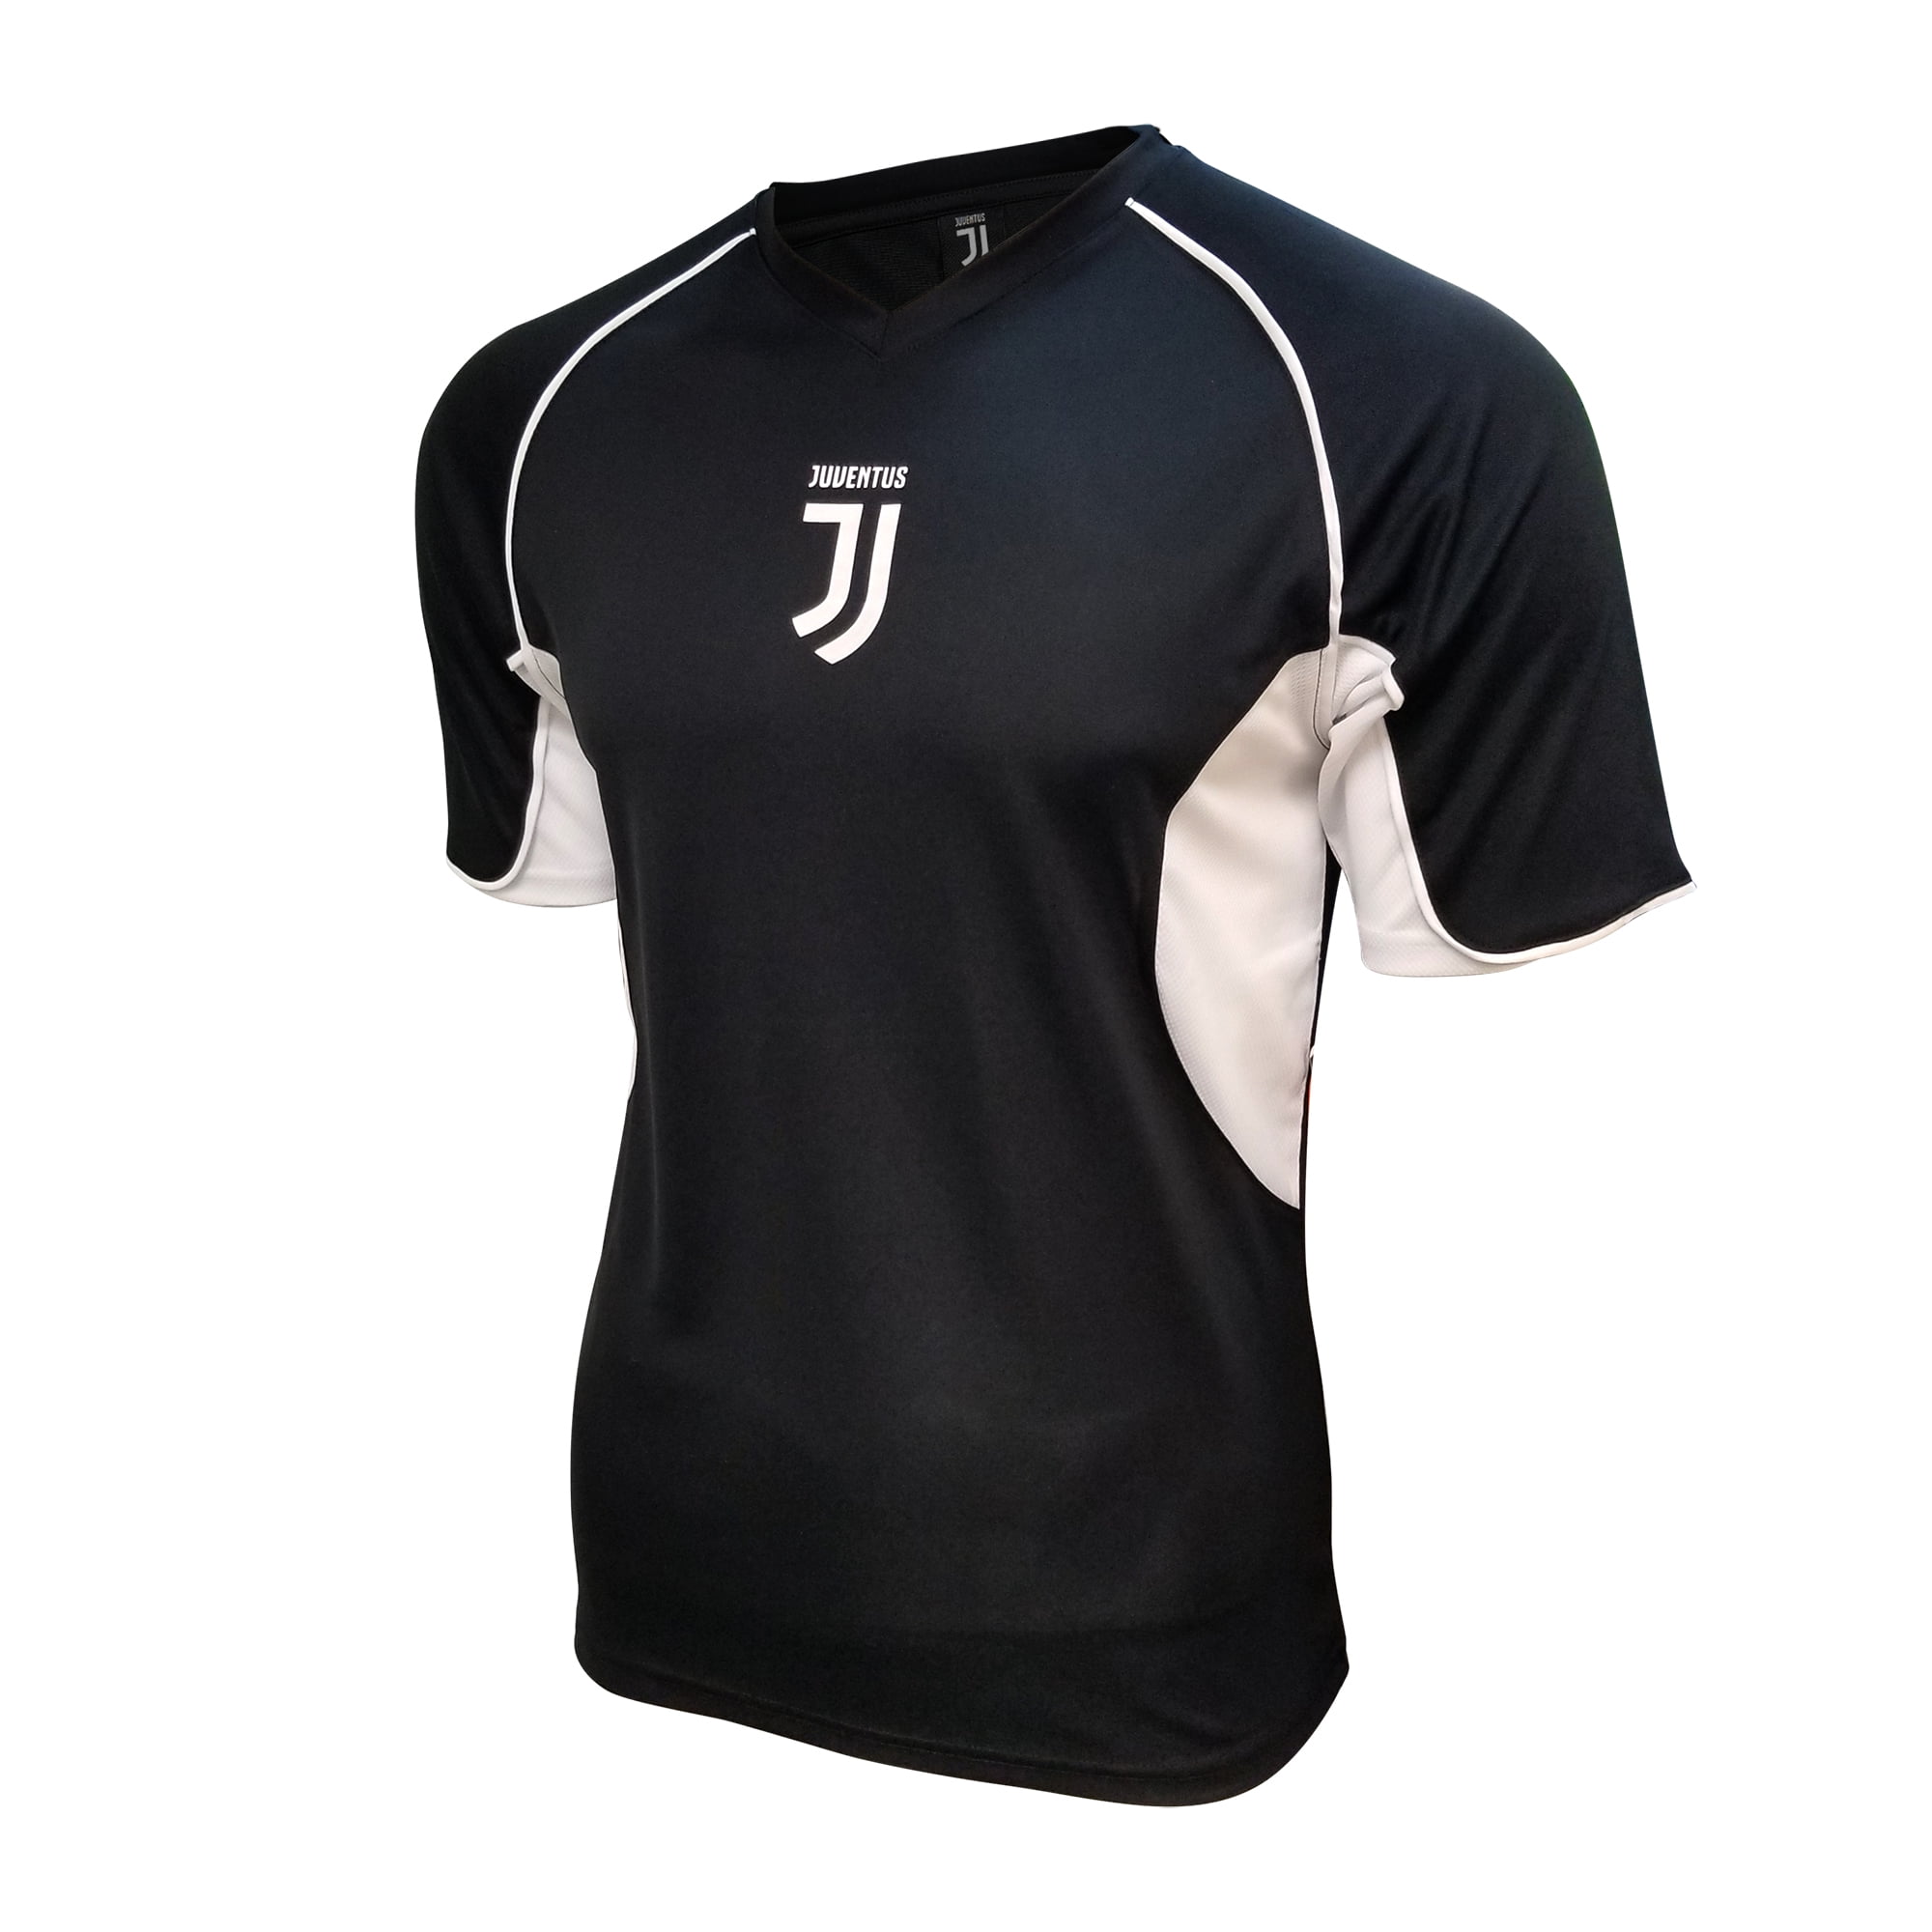 Official Adult Soccer Poly Shirt Jersey 03 L Icon Sports Group Juventus F.C 